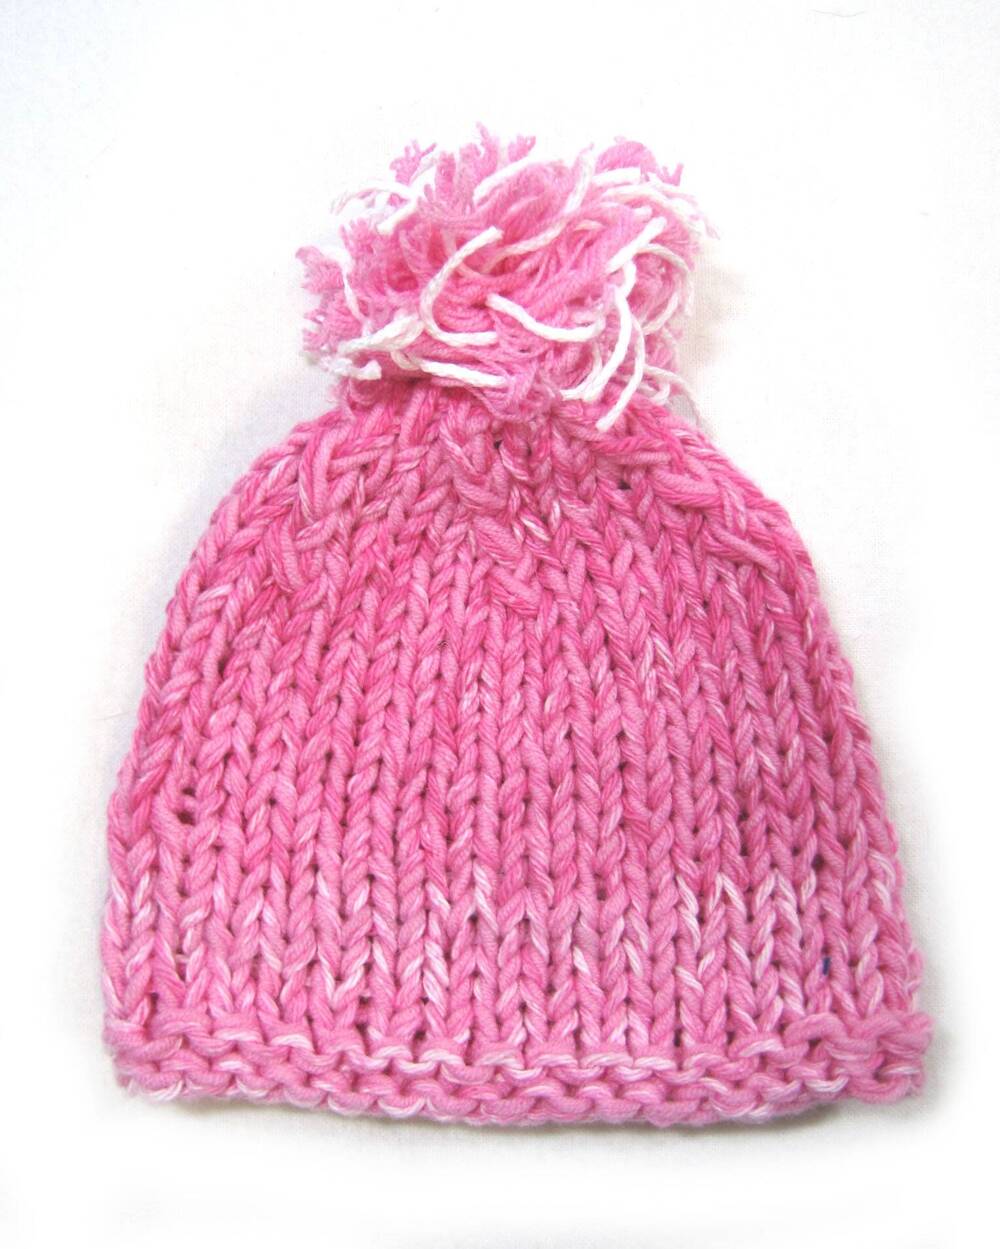 KSS Pink Colored Hat with Pom Pom 12 - 13" (0 -6 Months) HA-717 KSS-HA-717